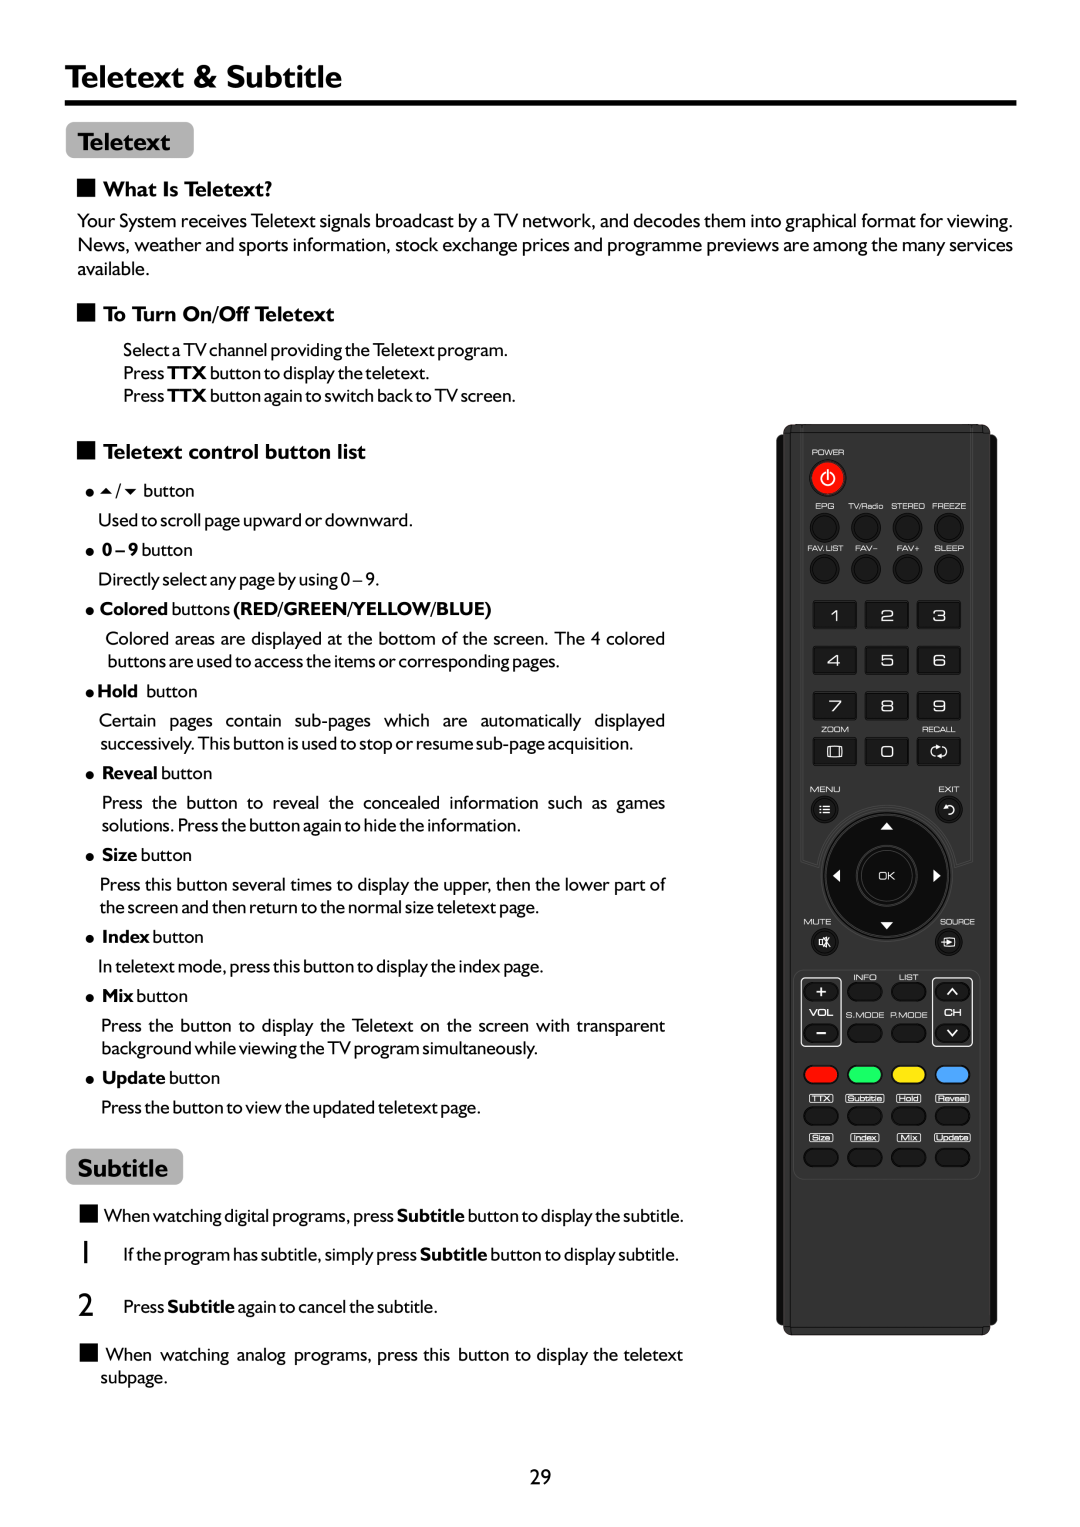 Palsonic TFTV815HD Teletext & Subtitle, What Is Teletext?, To Turn On/Off Teletext, Teletext control button list 